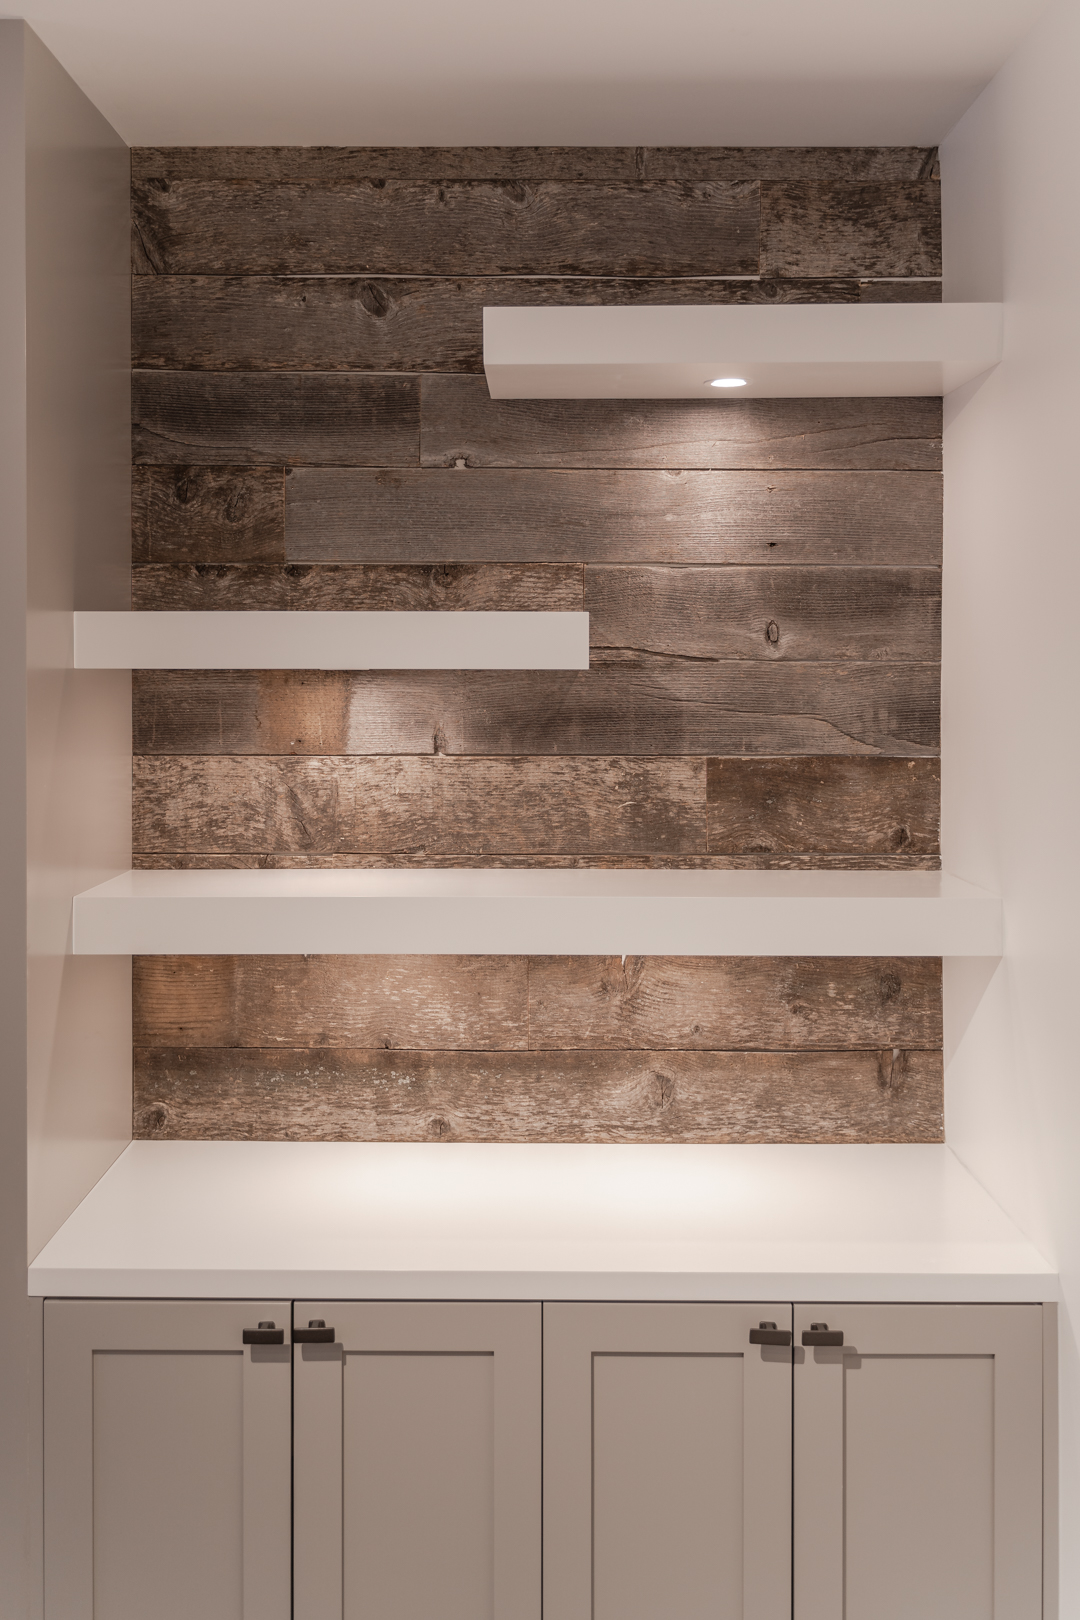 Built-in cabinets and white floating shelves with wood backing